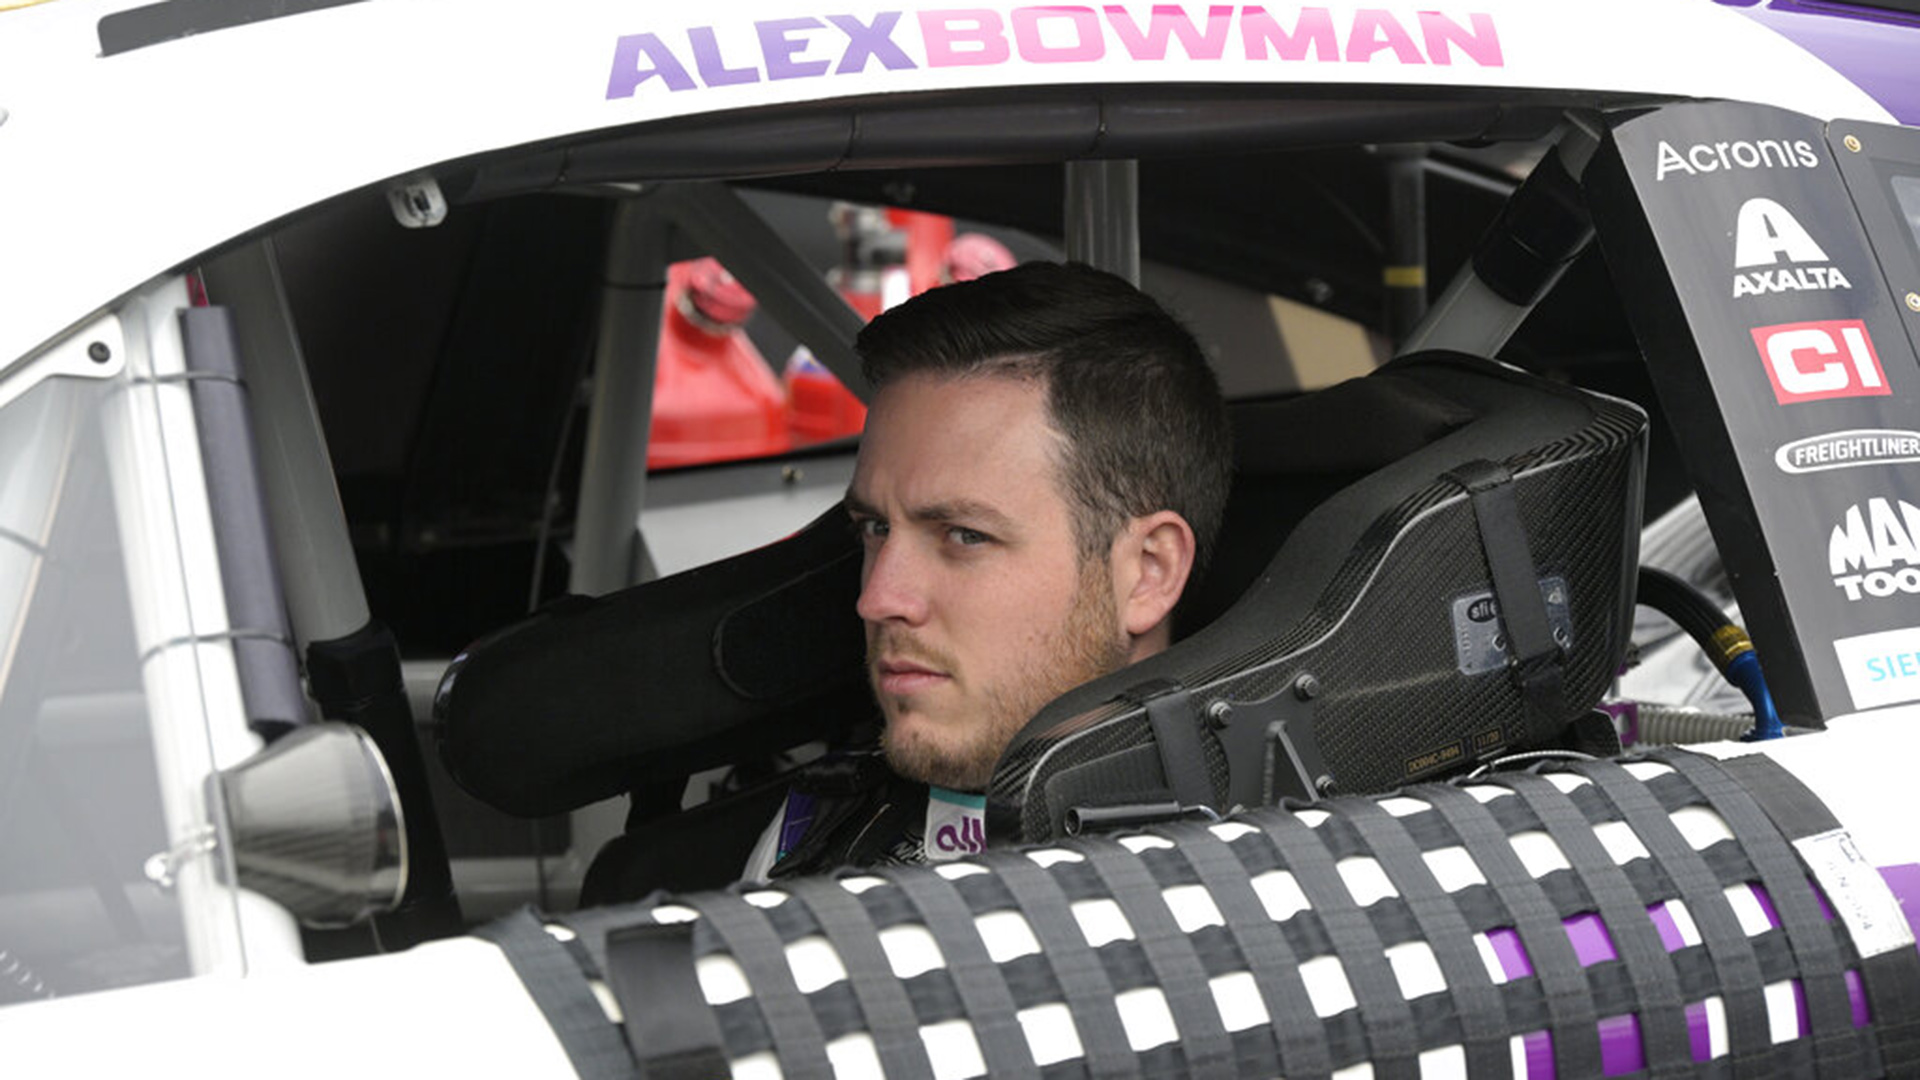 Alex Bowman sits in his car during a practice session for the Daytona 500 auto race at Daytona International Speedway, Saturday, Feb. 19, 2022.